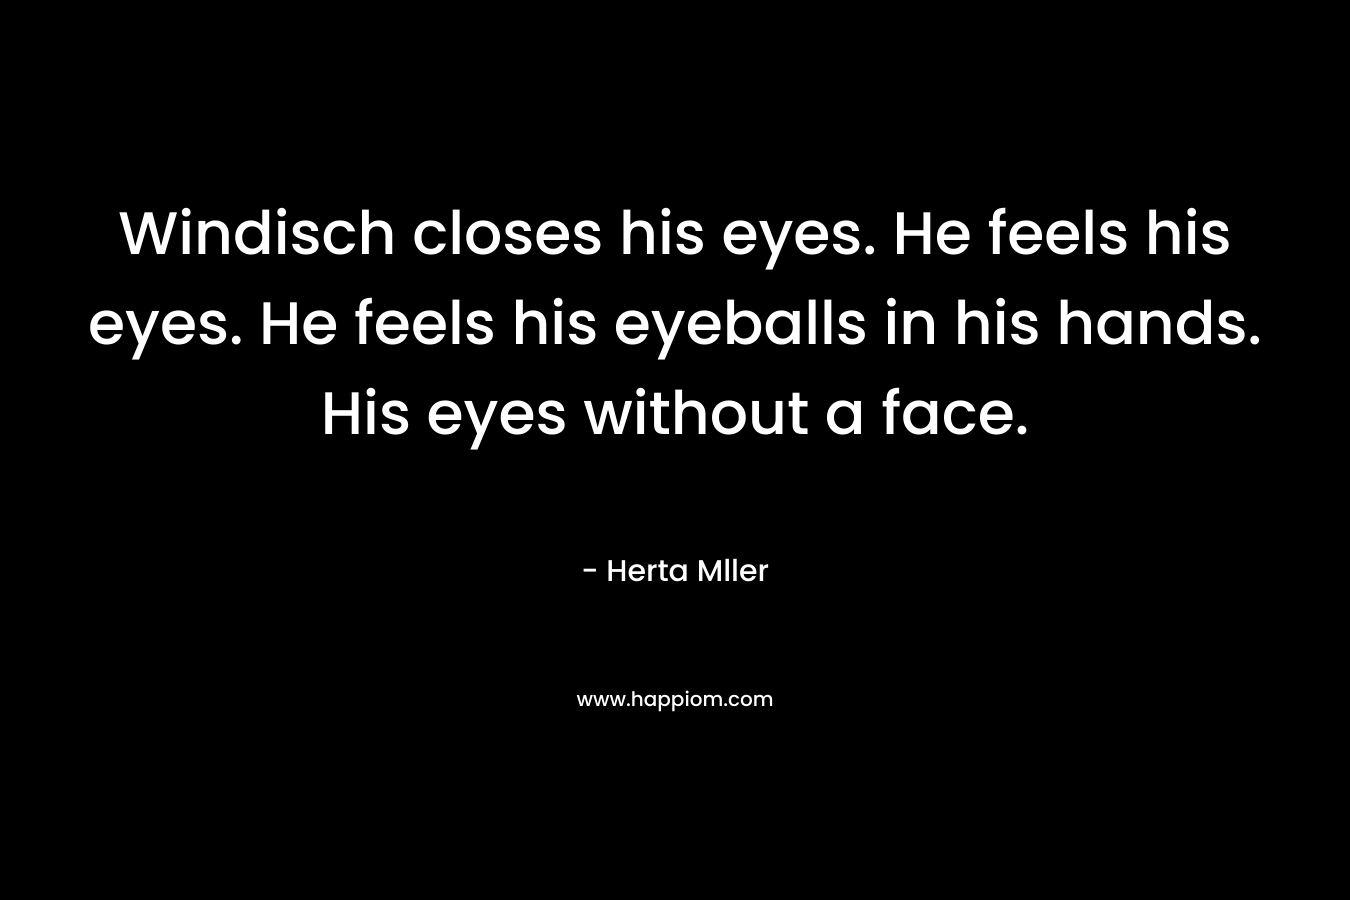 Windisch closes his eyes. He feels his eyes. He feels his eyeballs in his hands. His eyes without a face.